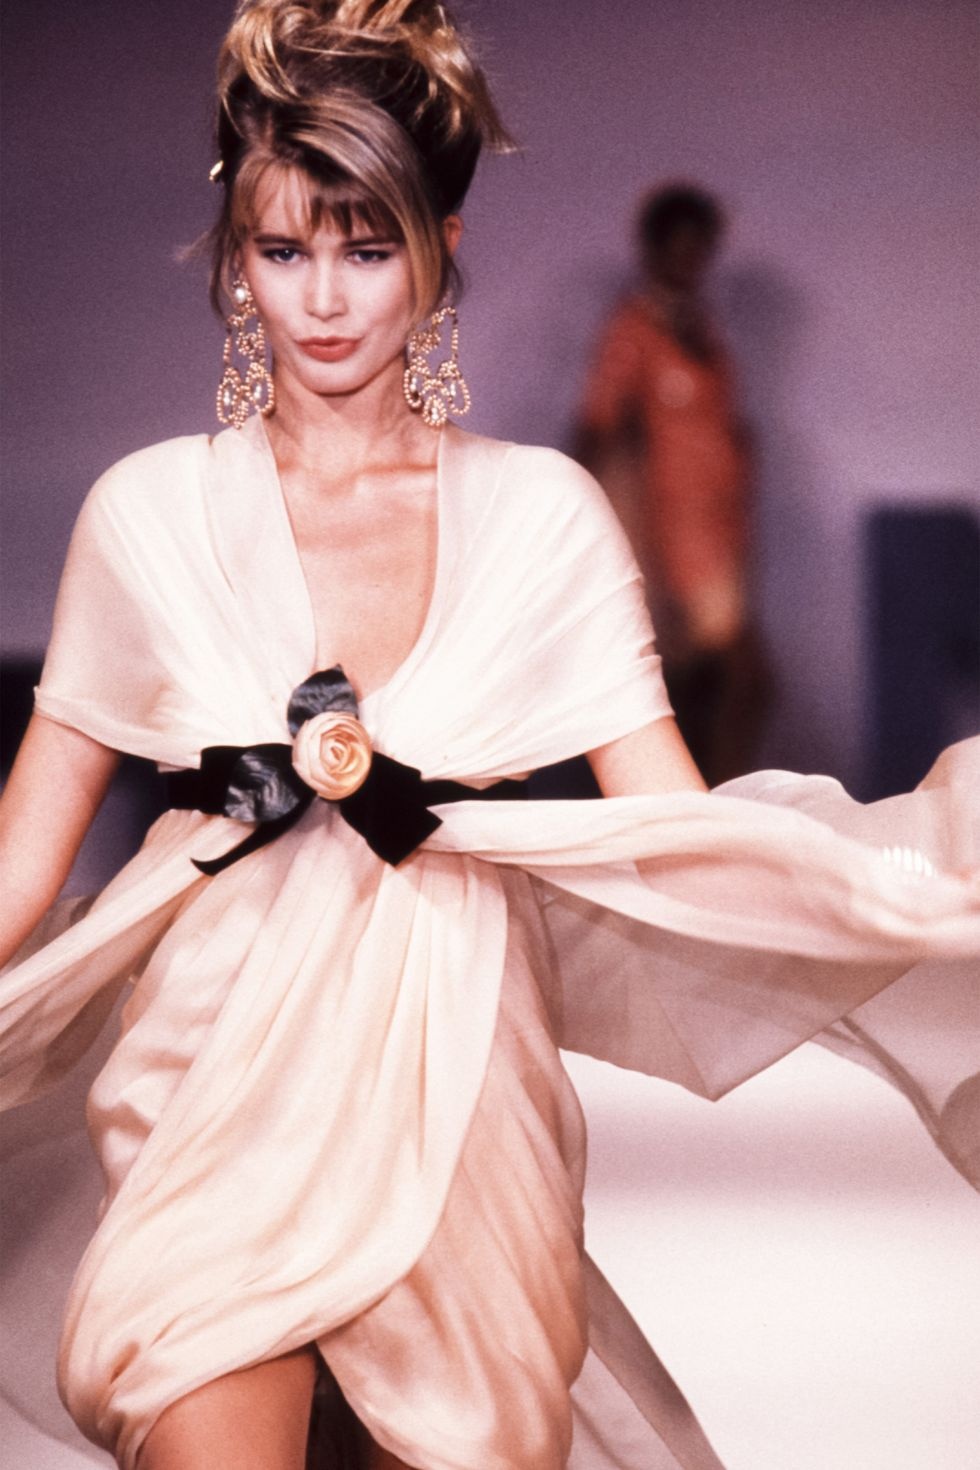 hbz-chanel-best-moments-1989-gettyimages-519514730-1550586671.jpg